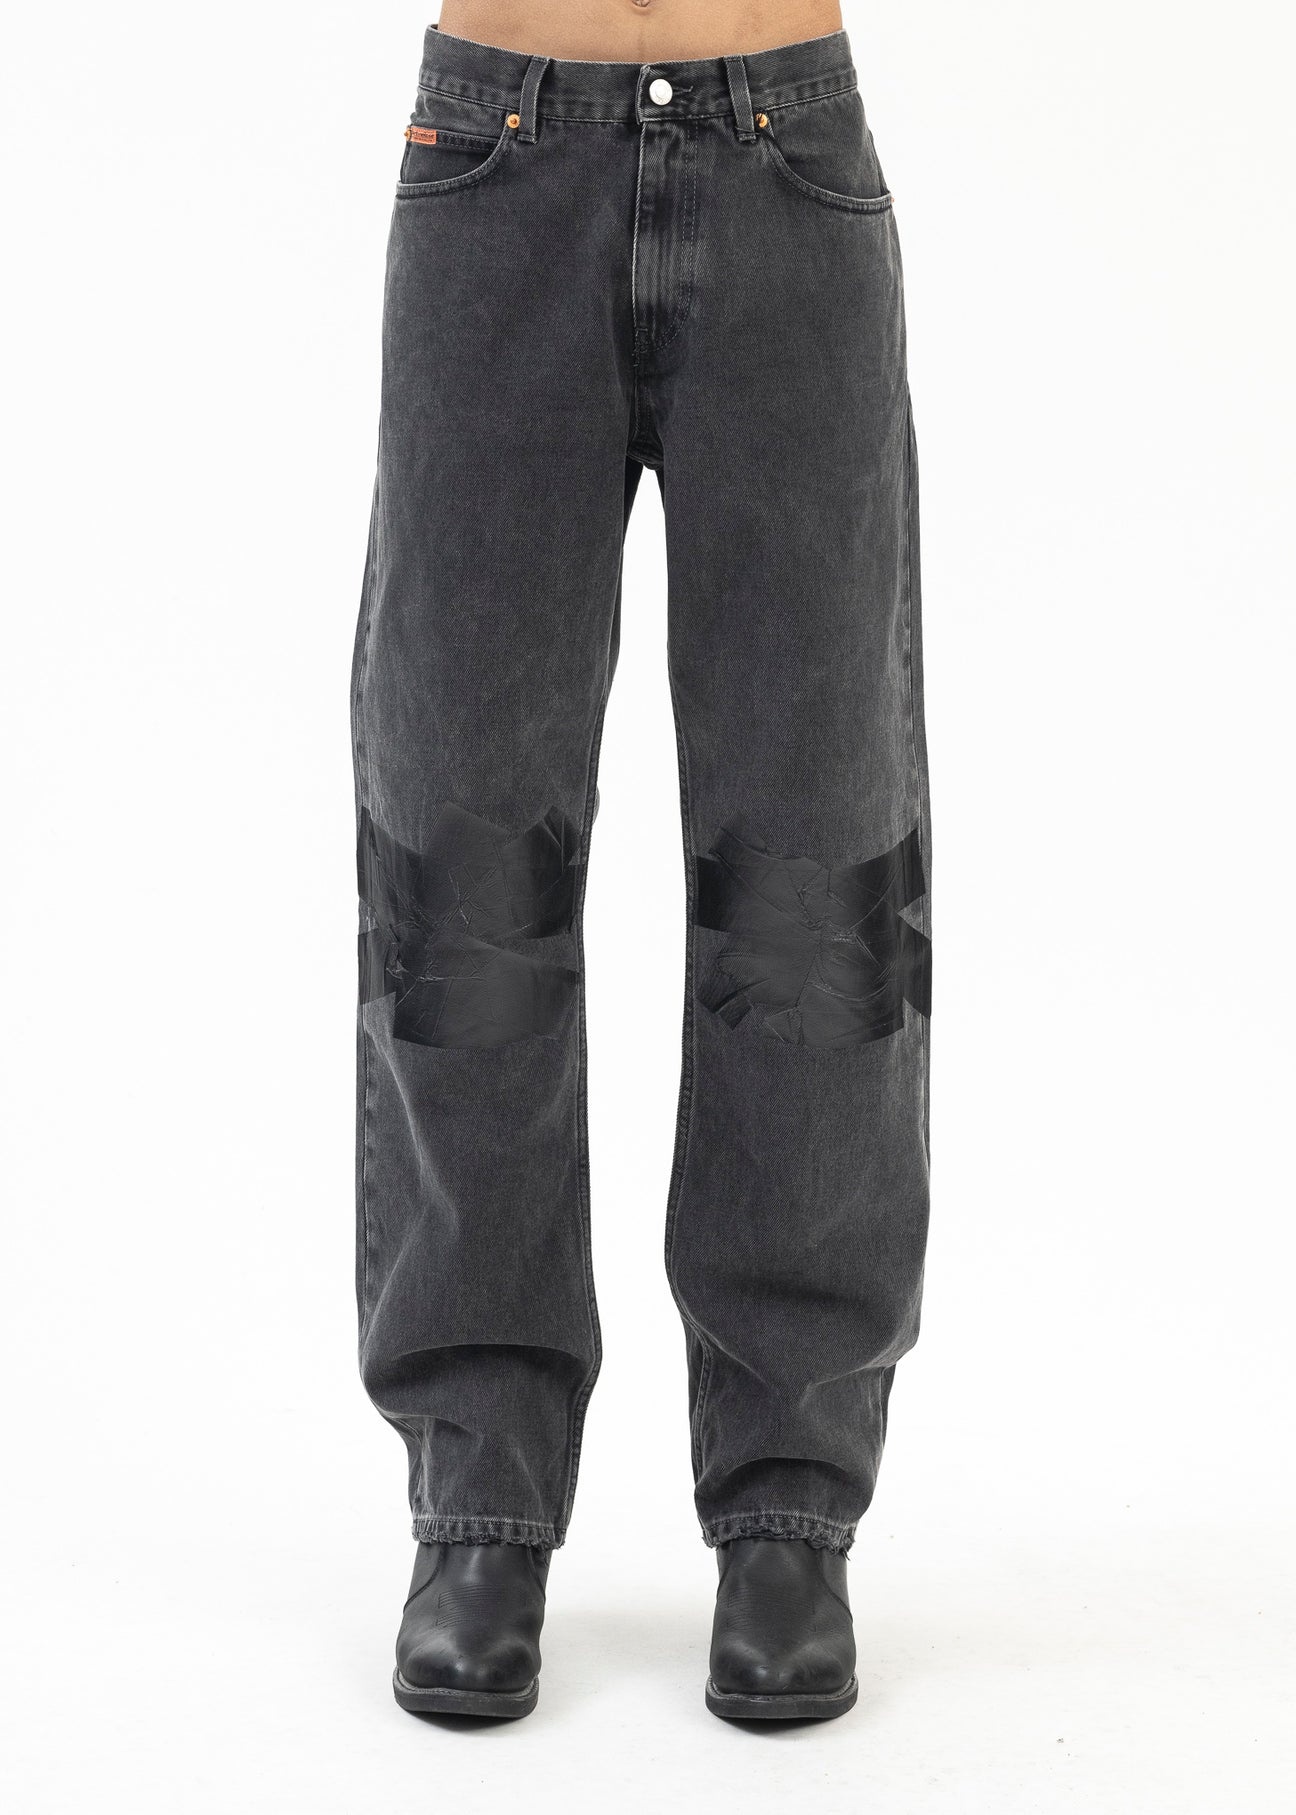 BLACK WASH / GAFFER TAPE RELAXED FIT JEAN - 1